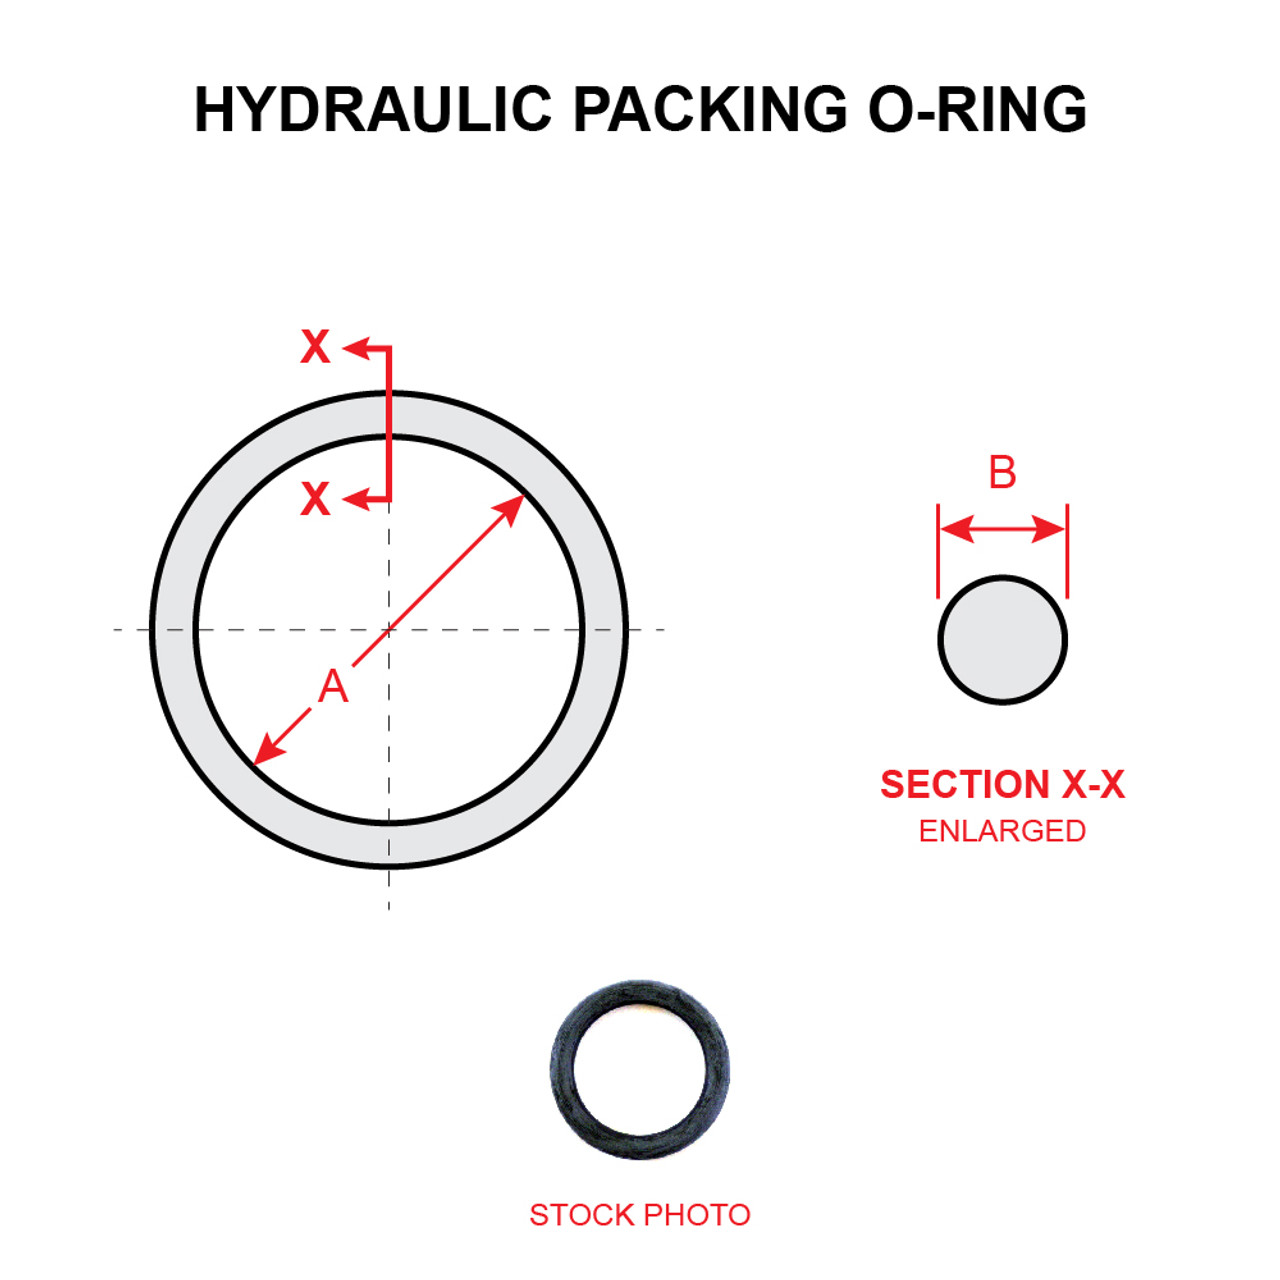 MS28775-137   HYDRAULIC PACKING O-RING